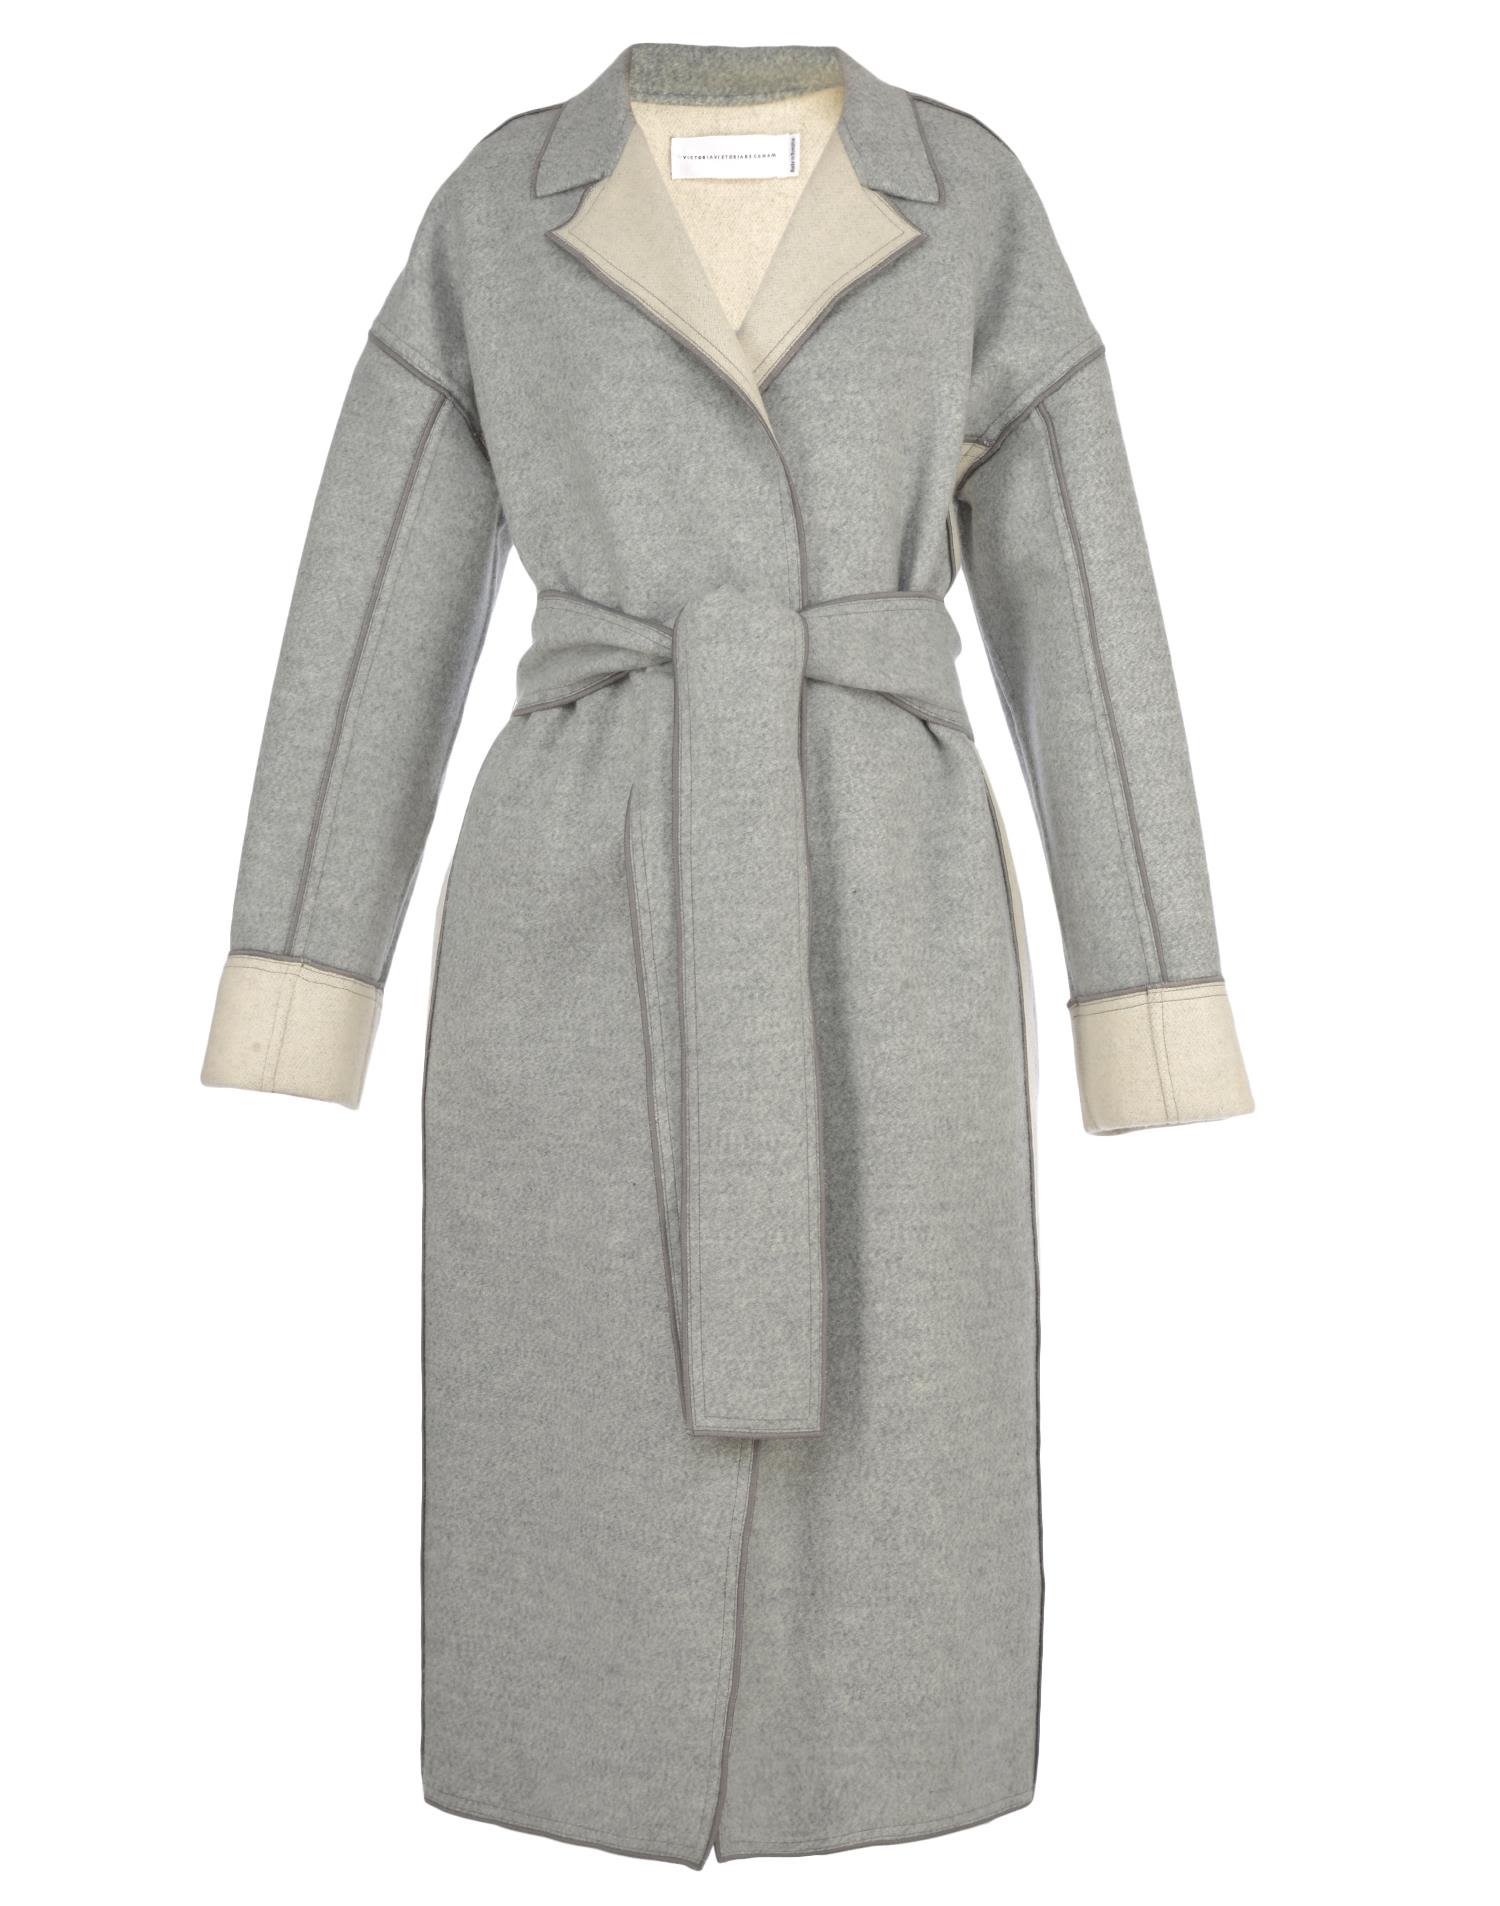 VICTORIA VICTORIA BECKHAM TWO-TONE WOOL AND CASHMERE-BLEND COAT, GREY ...